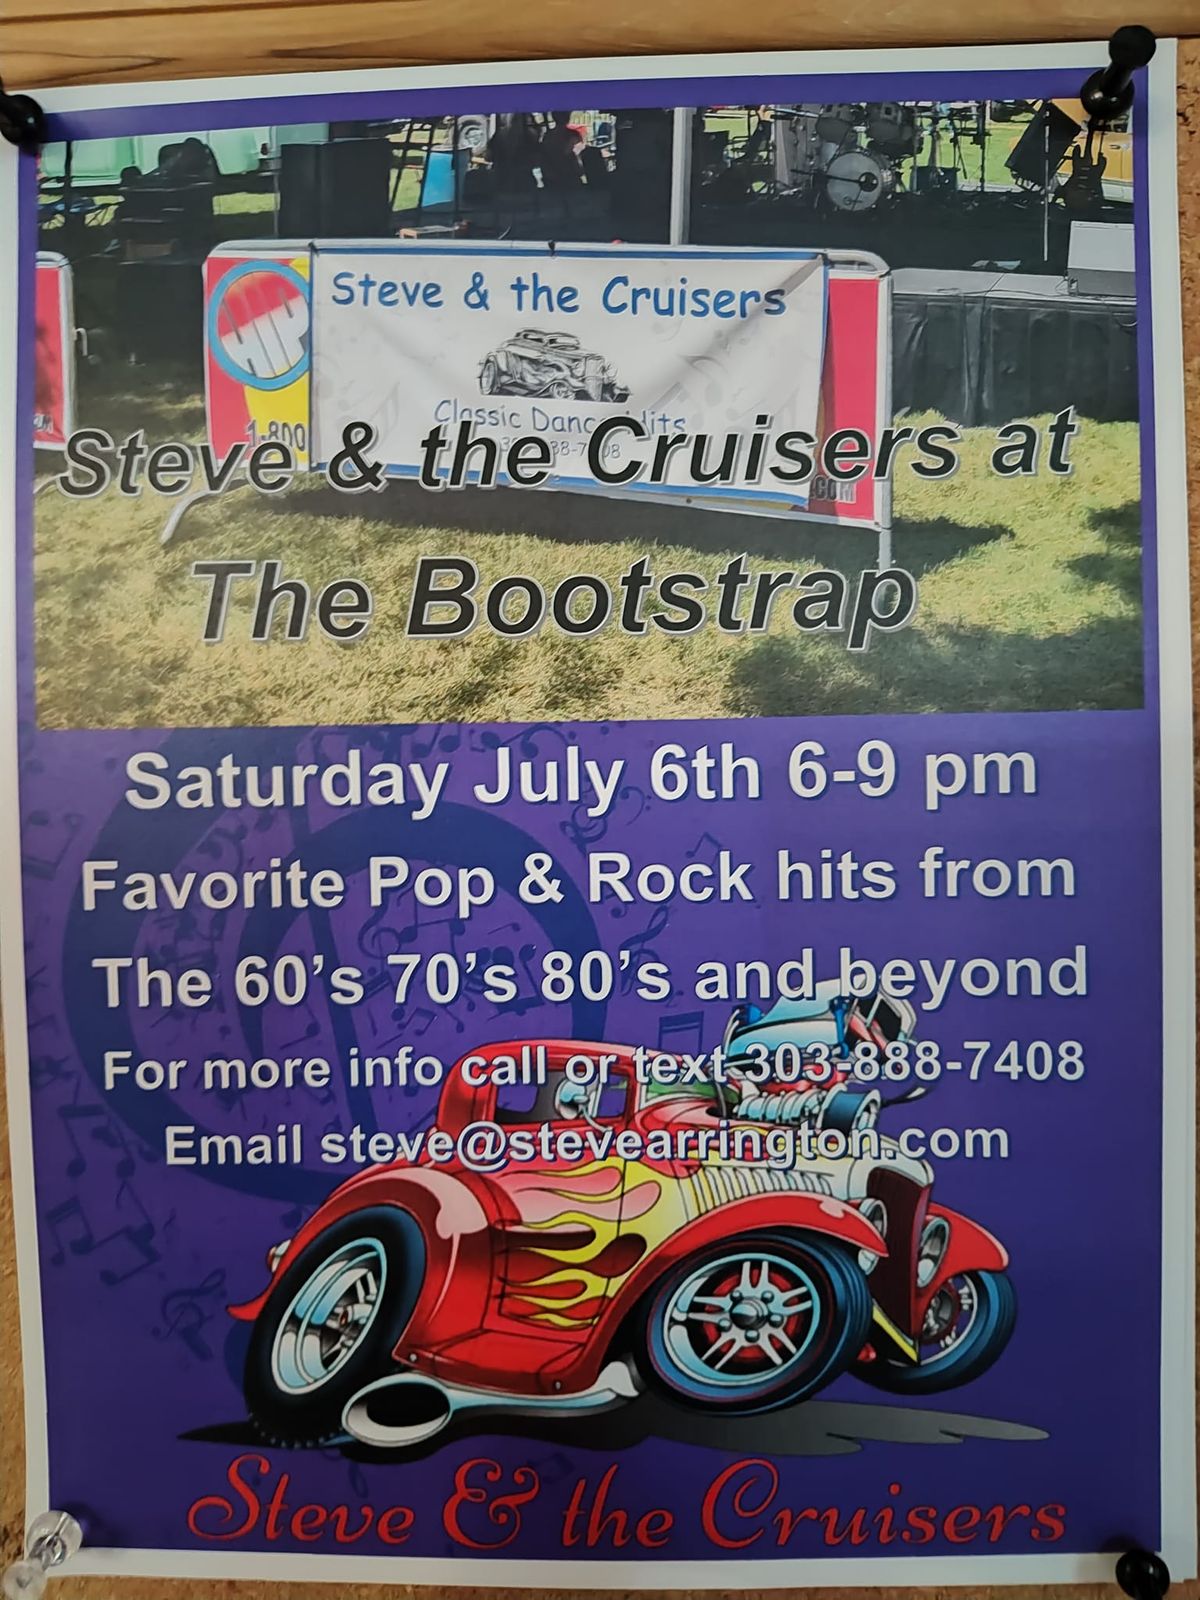 Steve & the Cruisers at the Bootstrap